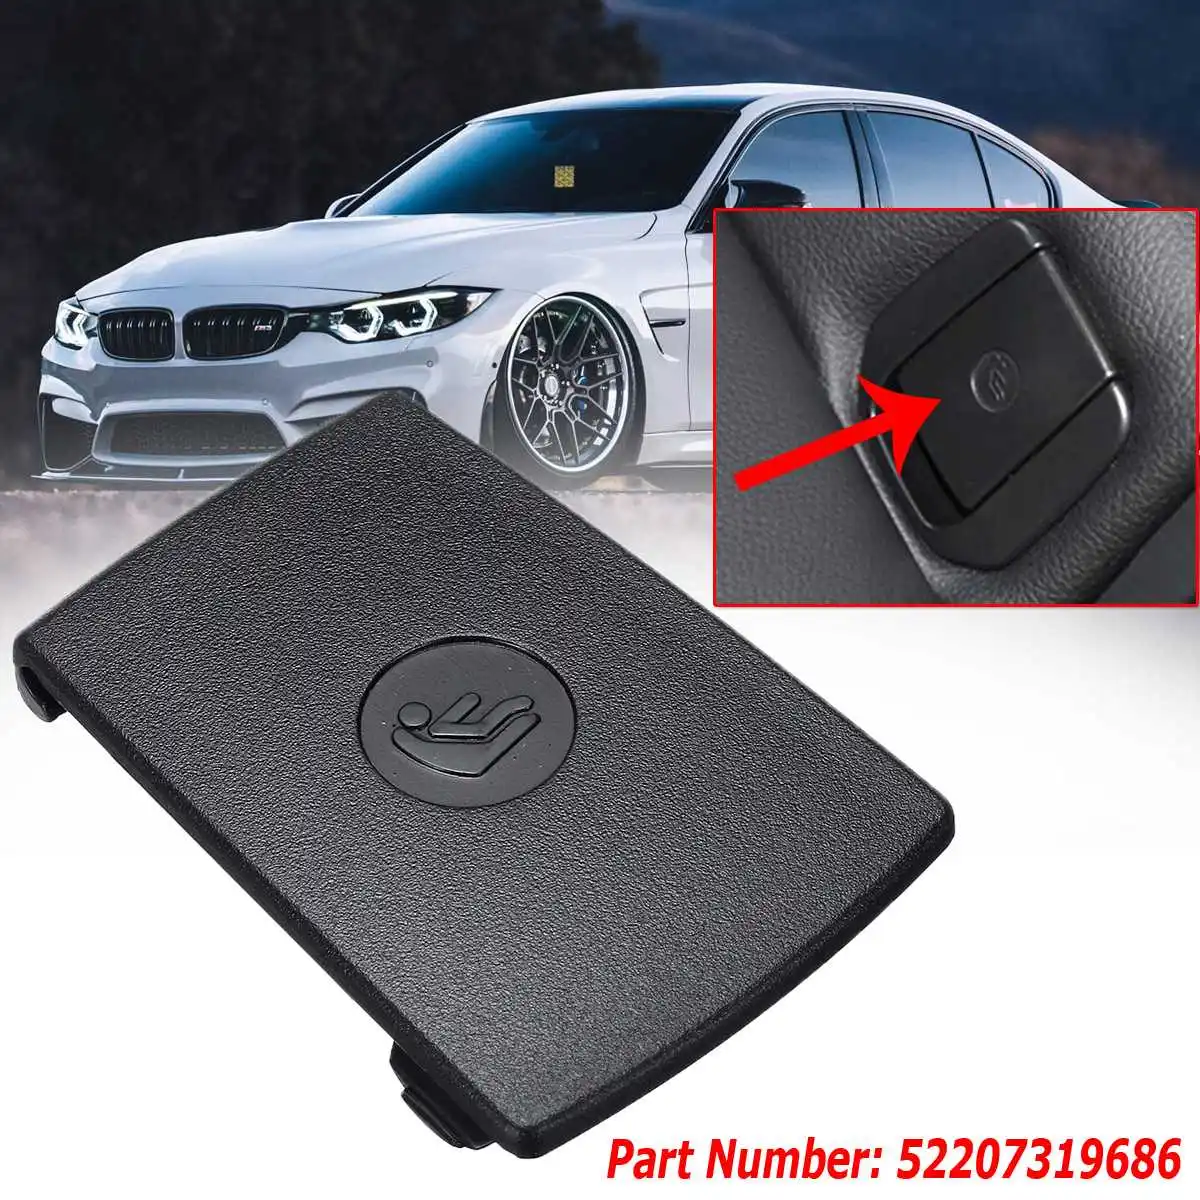 Car Rear Child Seat Safety Anchor Cover Fit For BMW 1 3 Series X1 E90 F30 F35